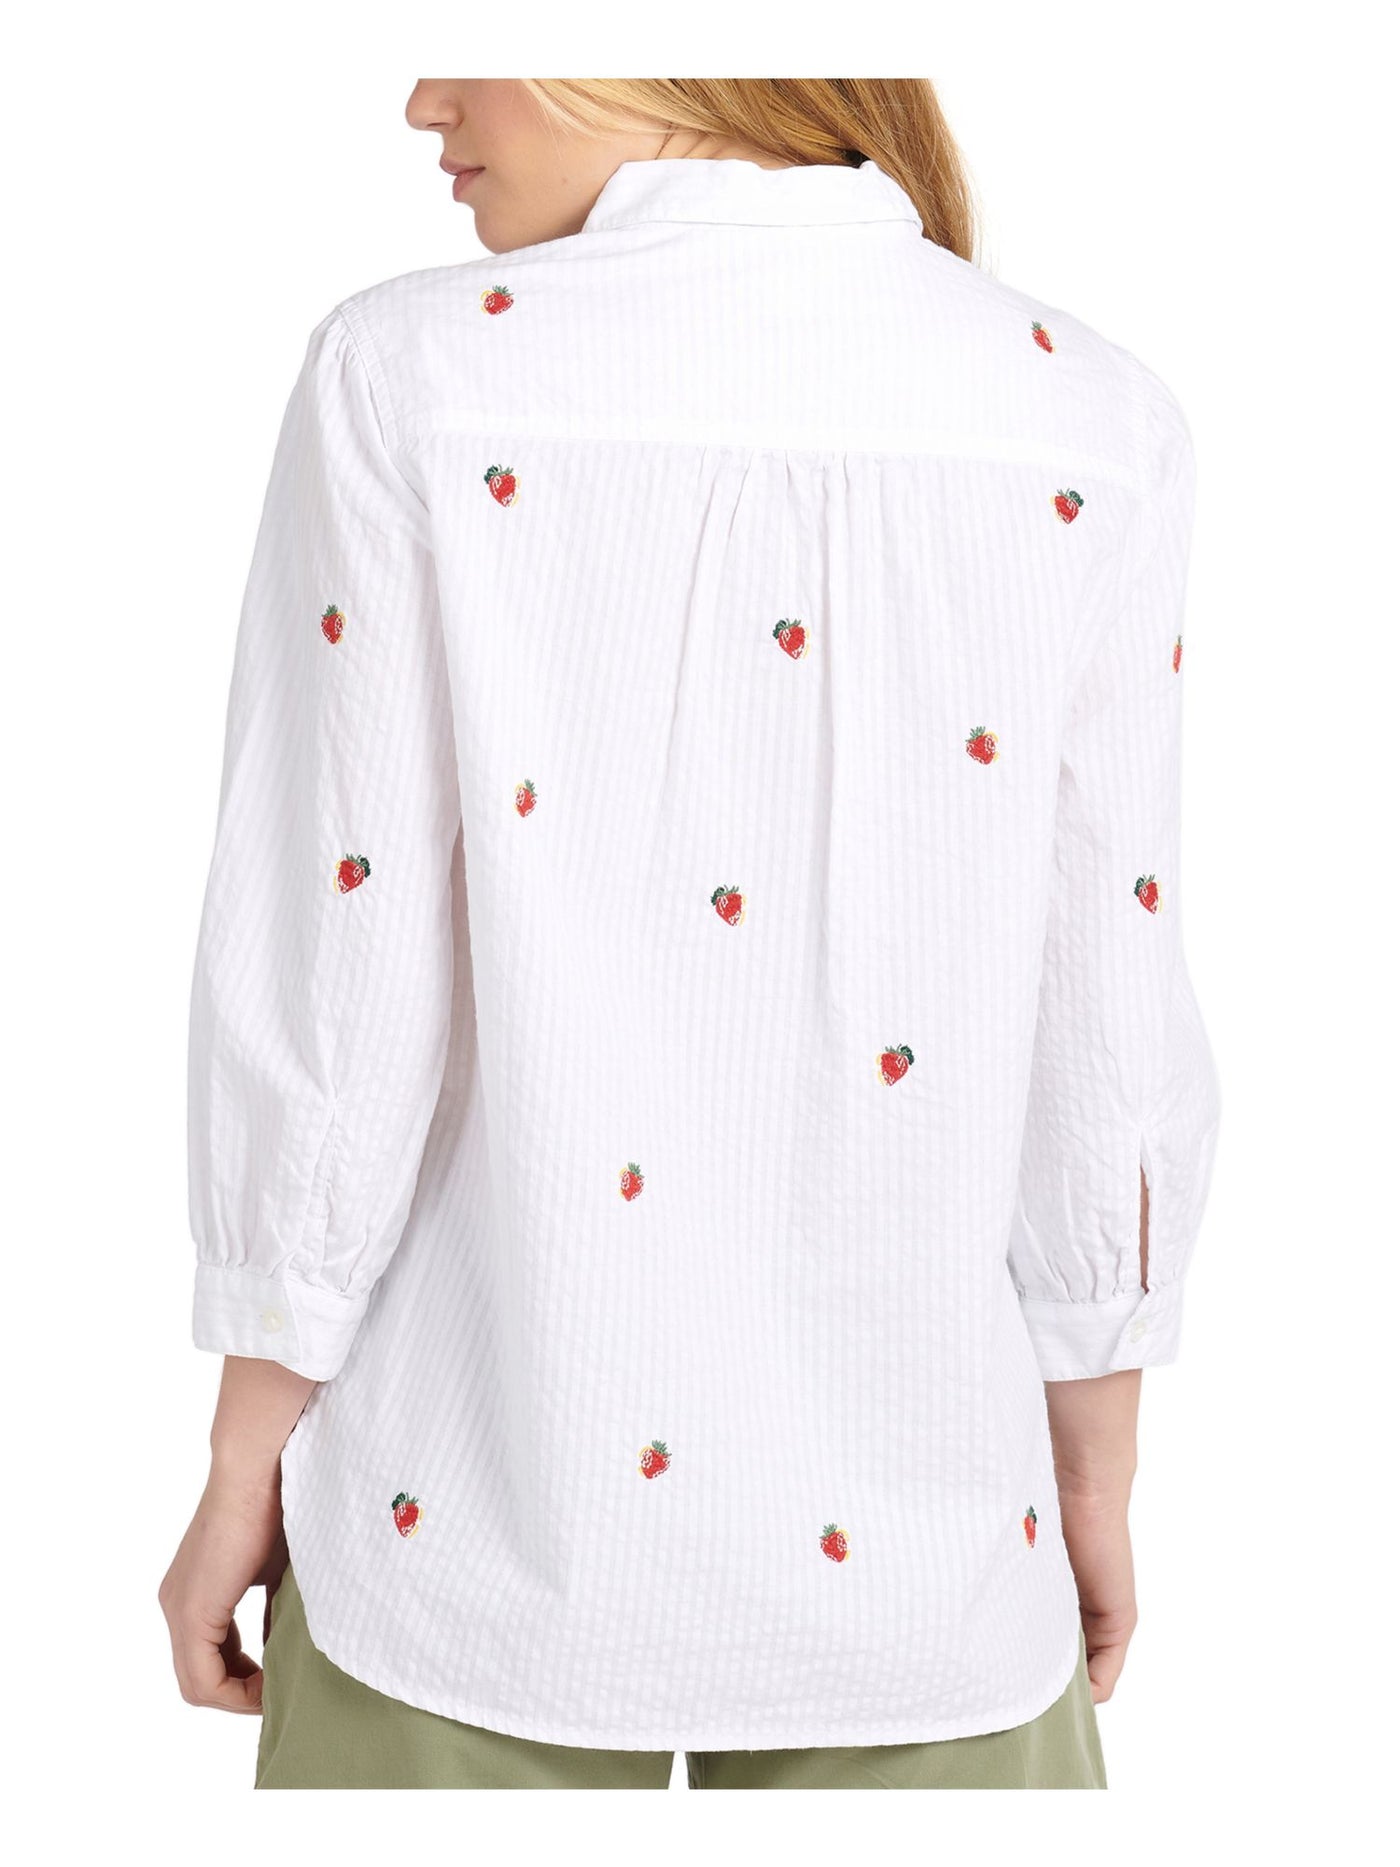 BARBOUR Womens White Textured Embroidered Cuffed Curved Hem Slitted Striped 3/4 Sleeve Collared Button Up Top 10